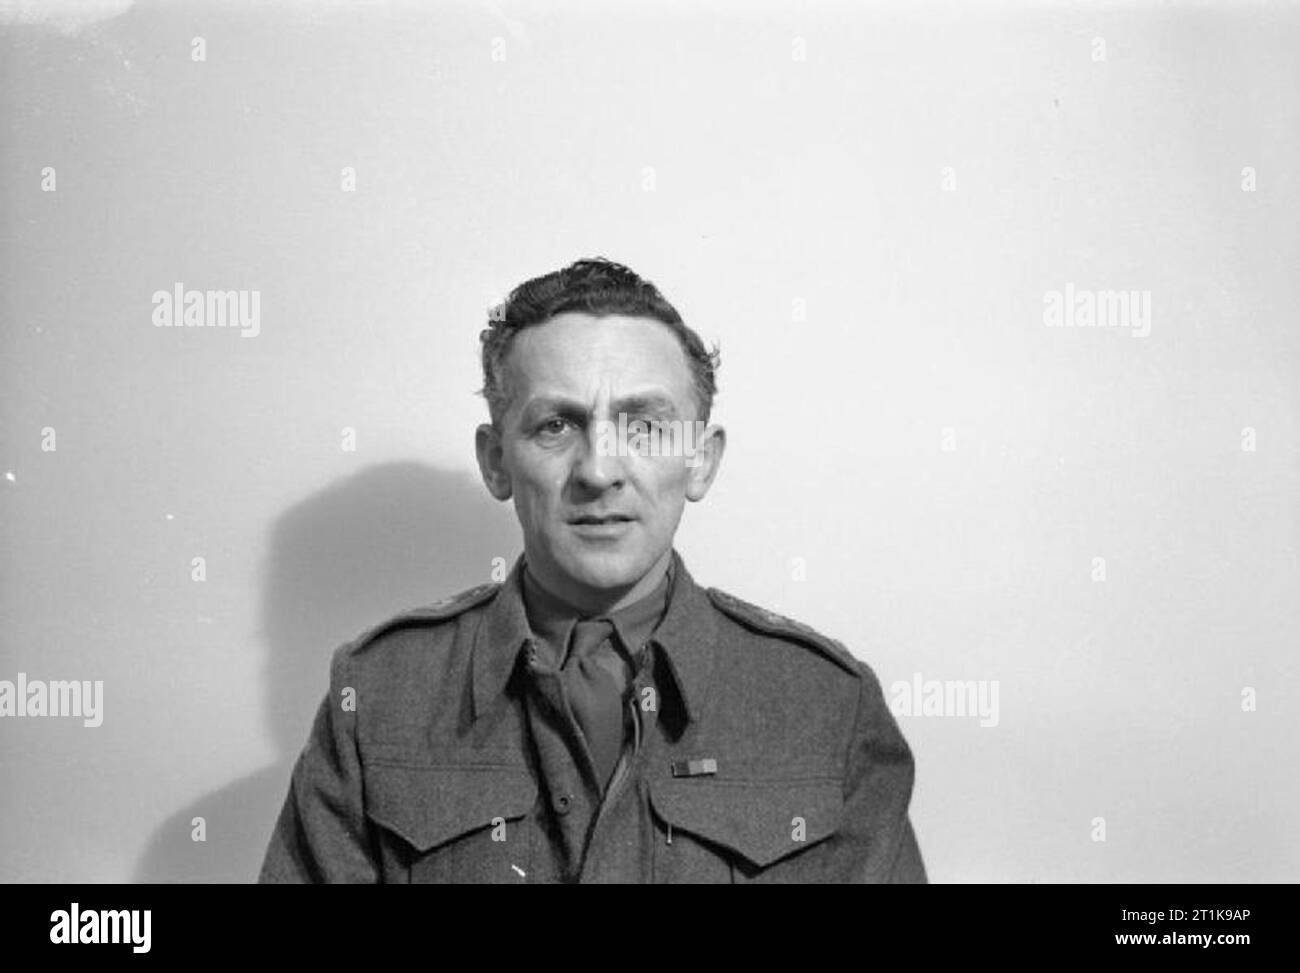 The British Army Film and Photographic Unit 1941 - 1947 Captain E G Malindine, War Office and Army Film and Photographic Unit official photographer shortly after being appointed to 5 Section of the Army Film and Photographic Unit, and tasked with covering the Normandy landings and operations in North West Europe. Captain Malindine served as one of the War Office official photographers in France, Britain and North West Europe from 1940 to 1945. During this time, he photographed numerous key events, including the Dunkirk evacuation in 1940, D Day, the liberation of Paris and Belsen, the German s Stock Photo